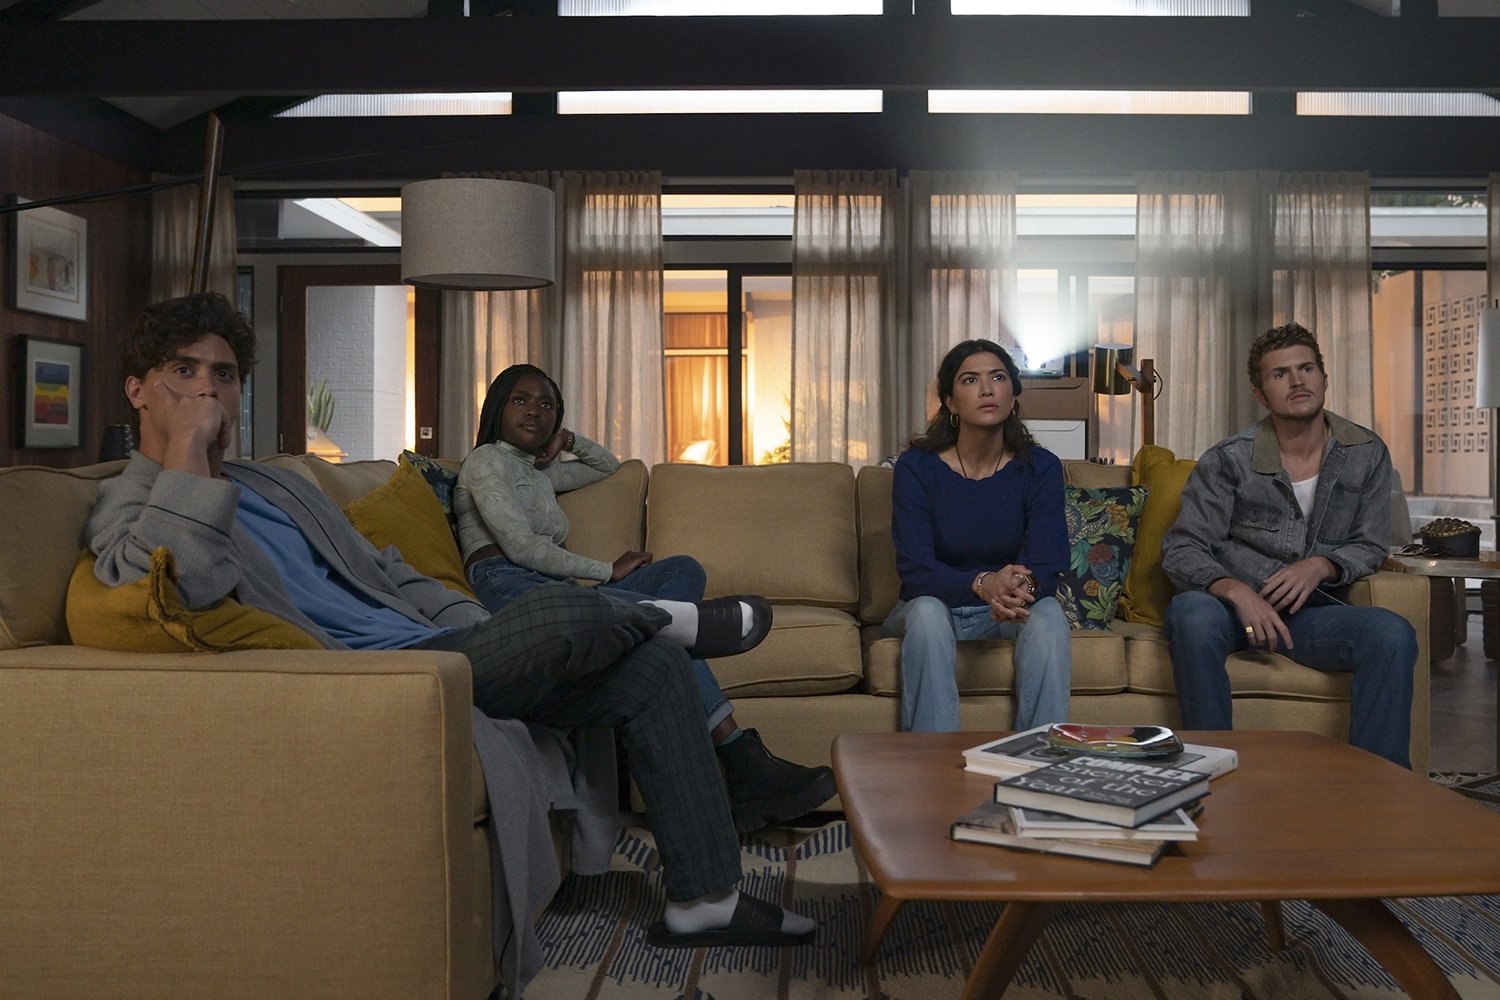 National Treasure: Edge of History: Antonio Cipriano as Oren, Zuri Reed as Tasha, Lisette Olivera as Jess, and Jake Austin Walker as Liam sitting on the couch and looking up at something